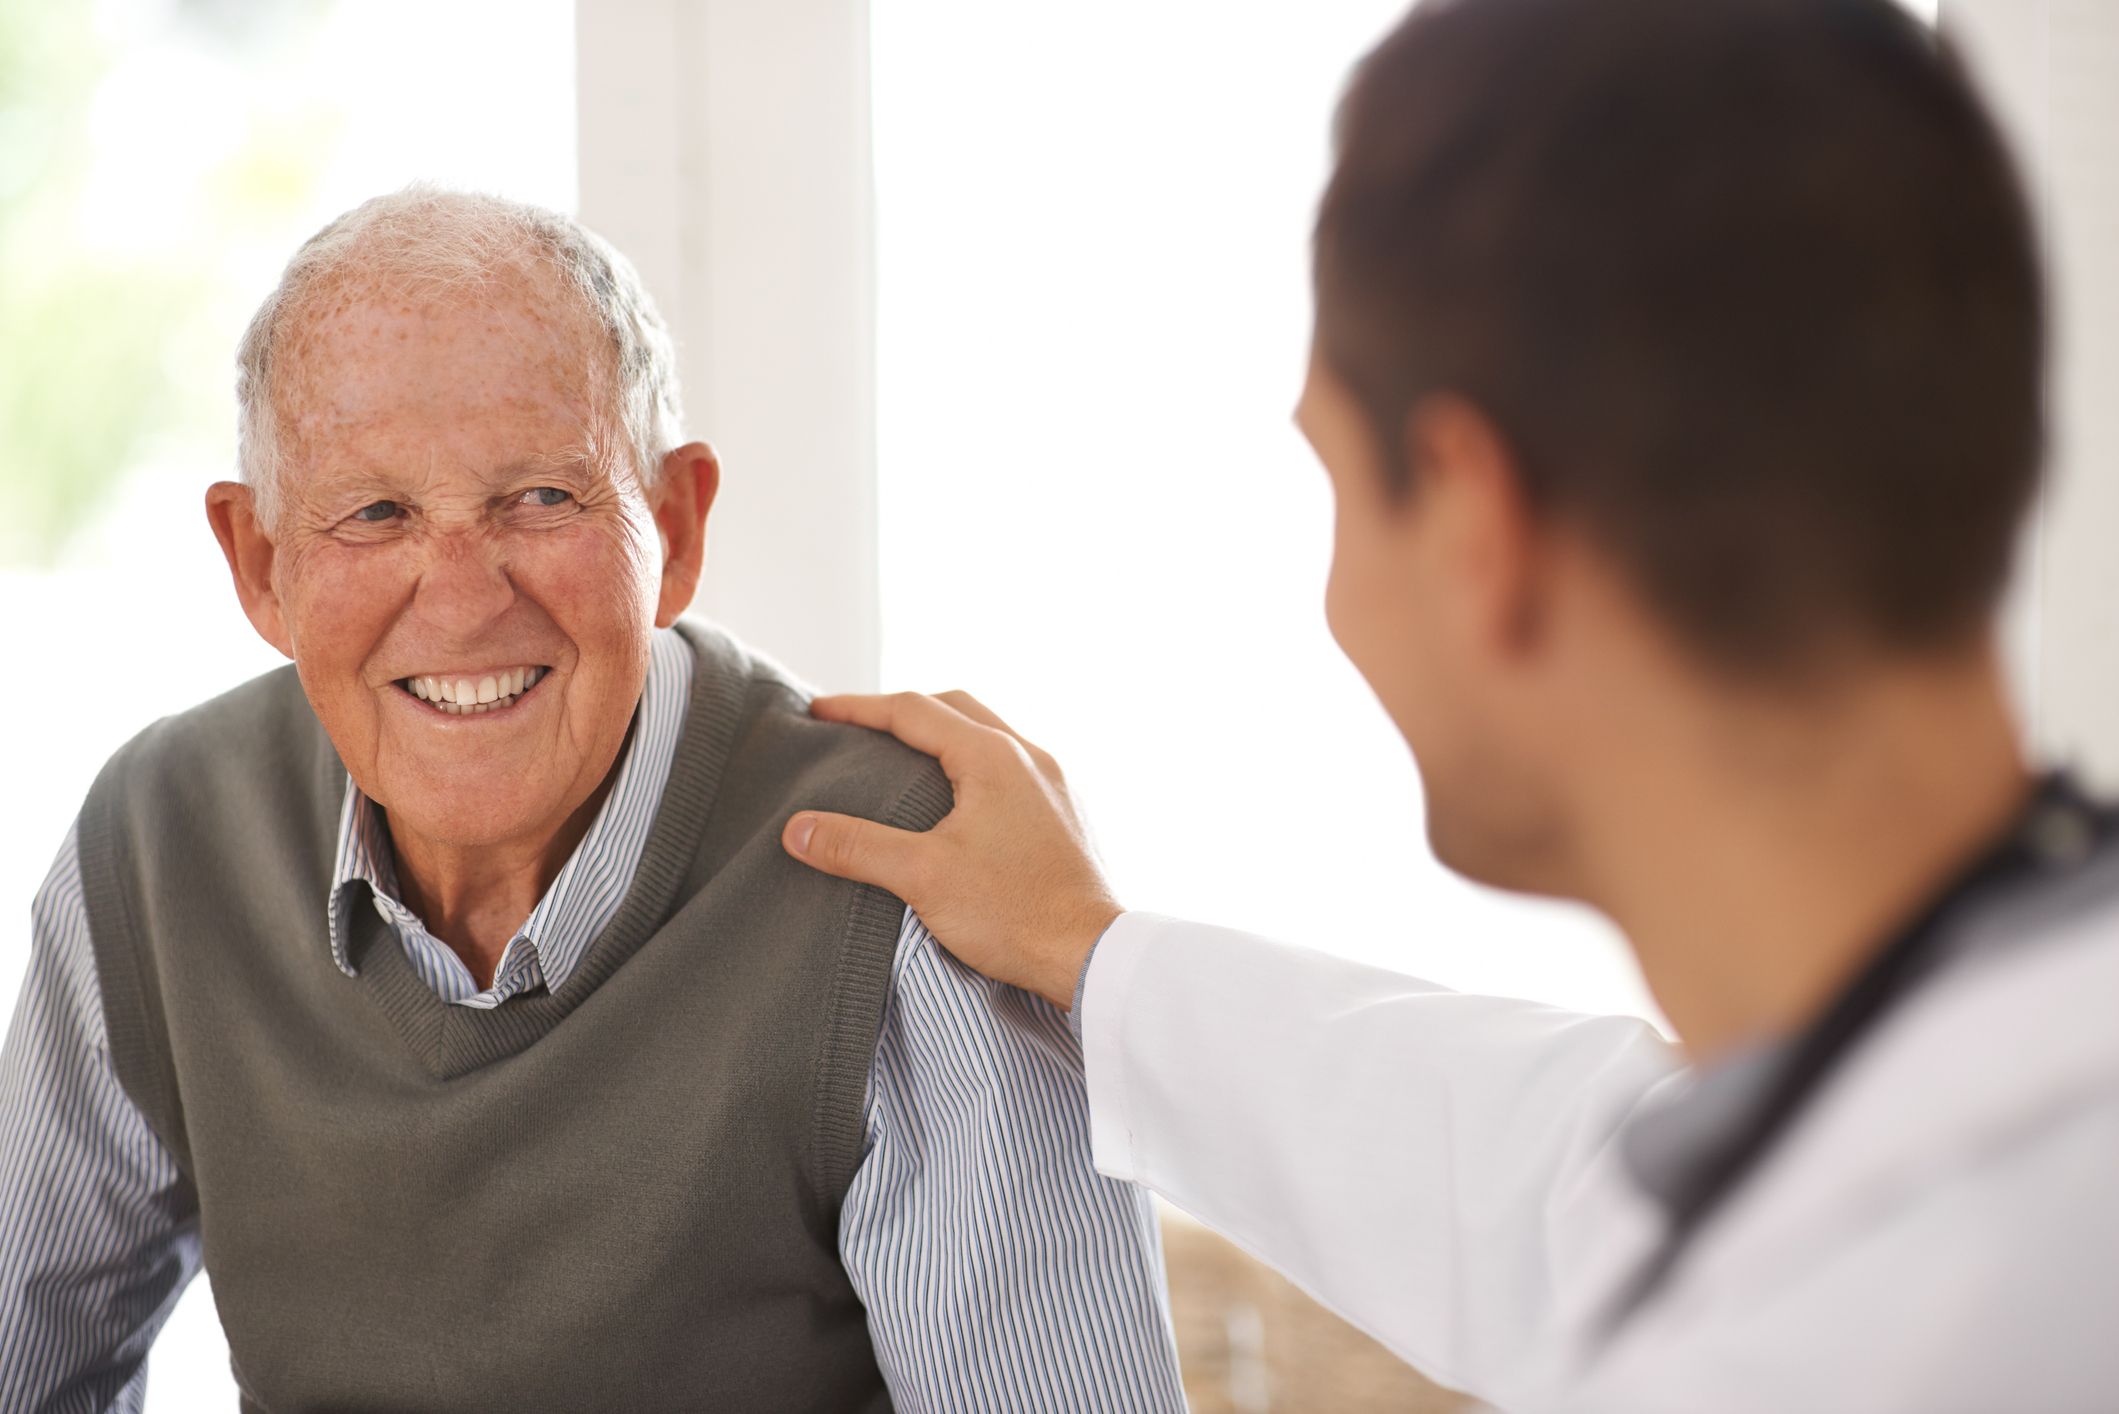 An elderly man smiling at a male physician in a white coat who has his hand on the elderly man's shoulder.